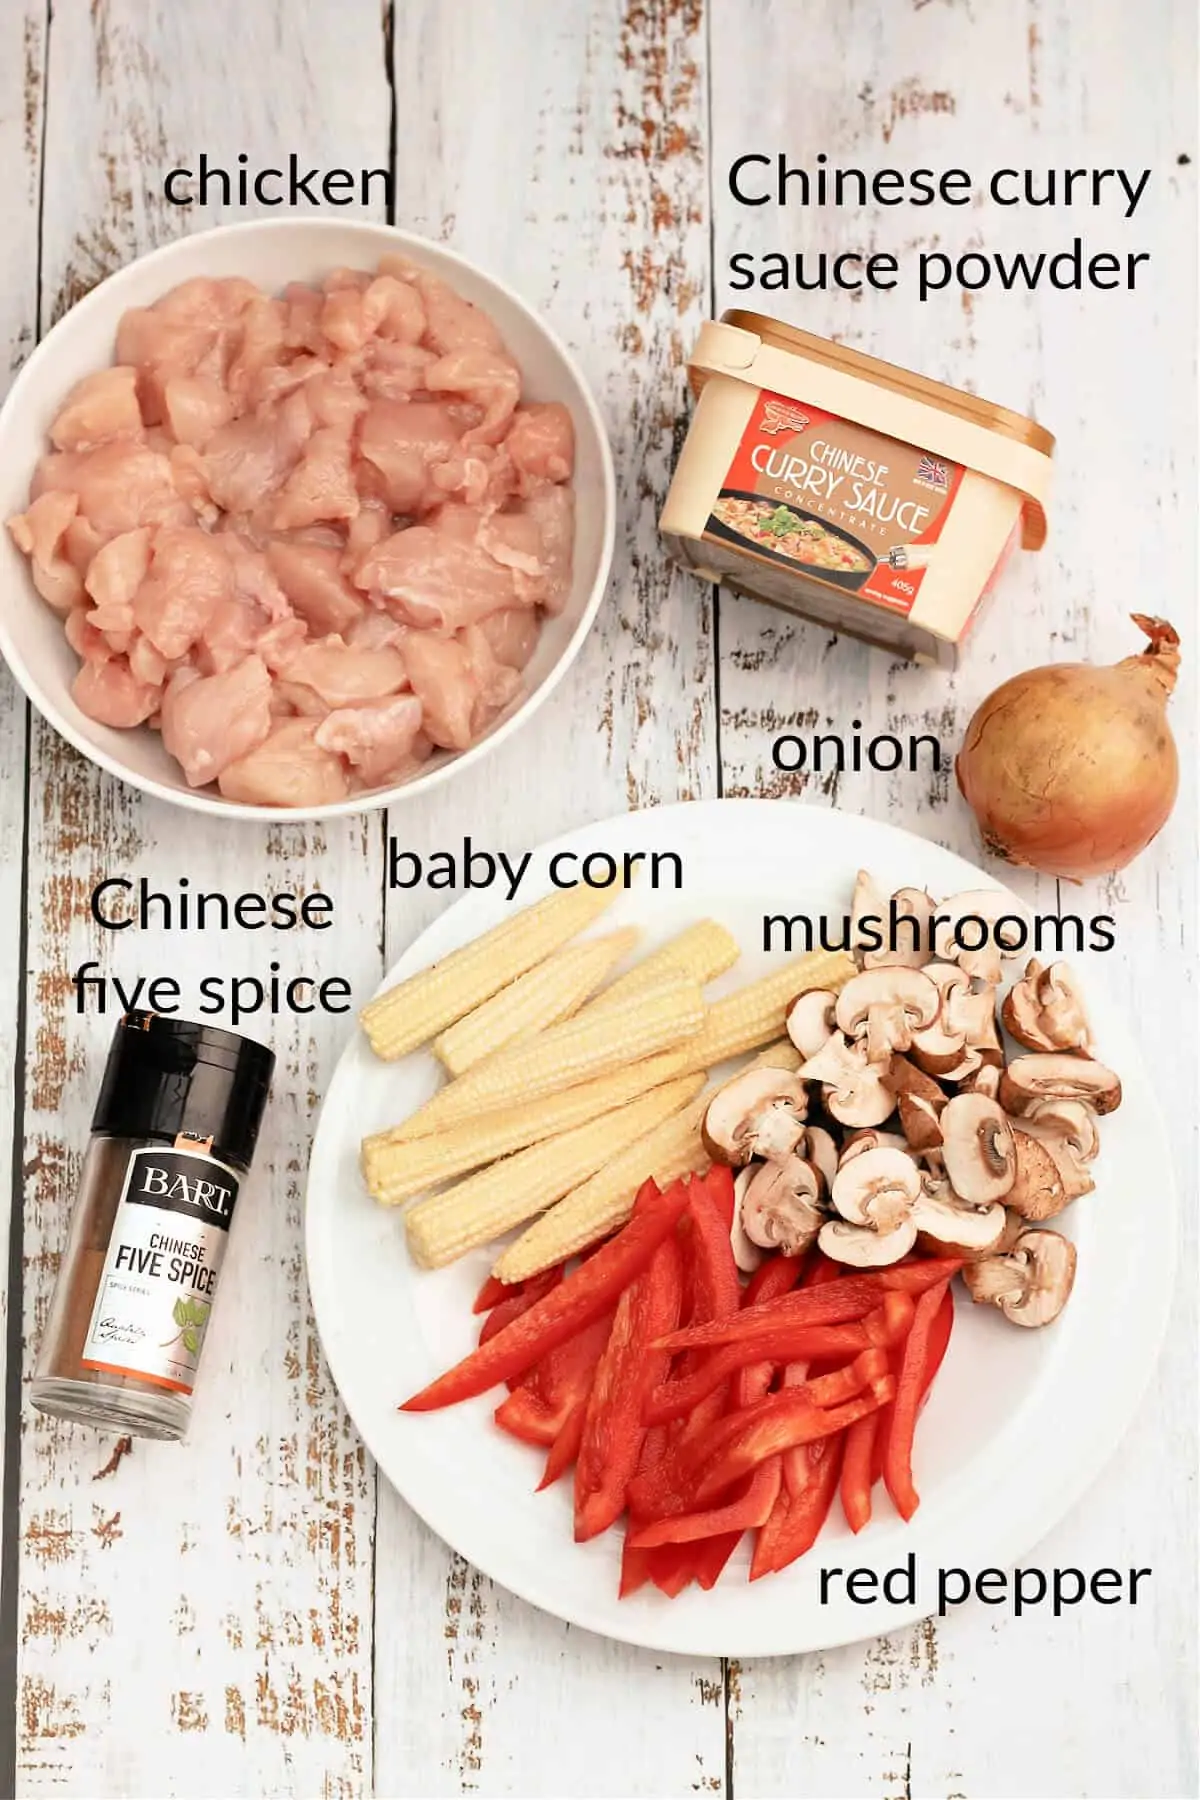 Labelled ingredients image showing all ingredients listed below.